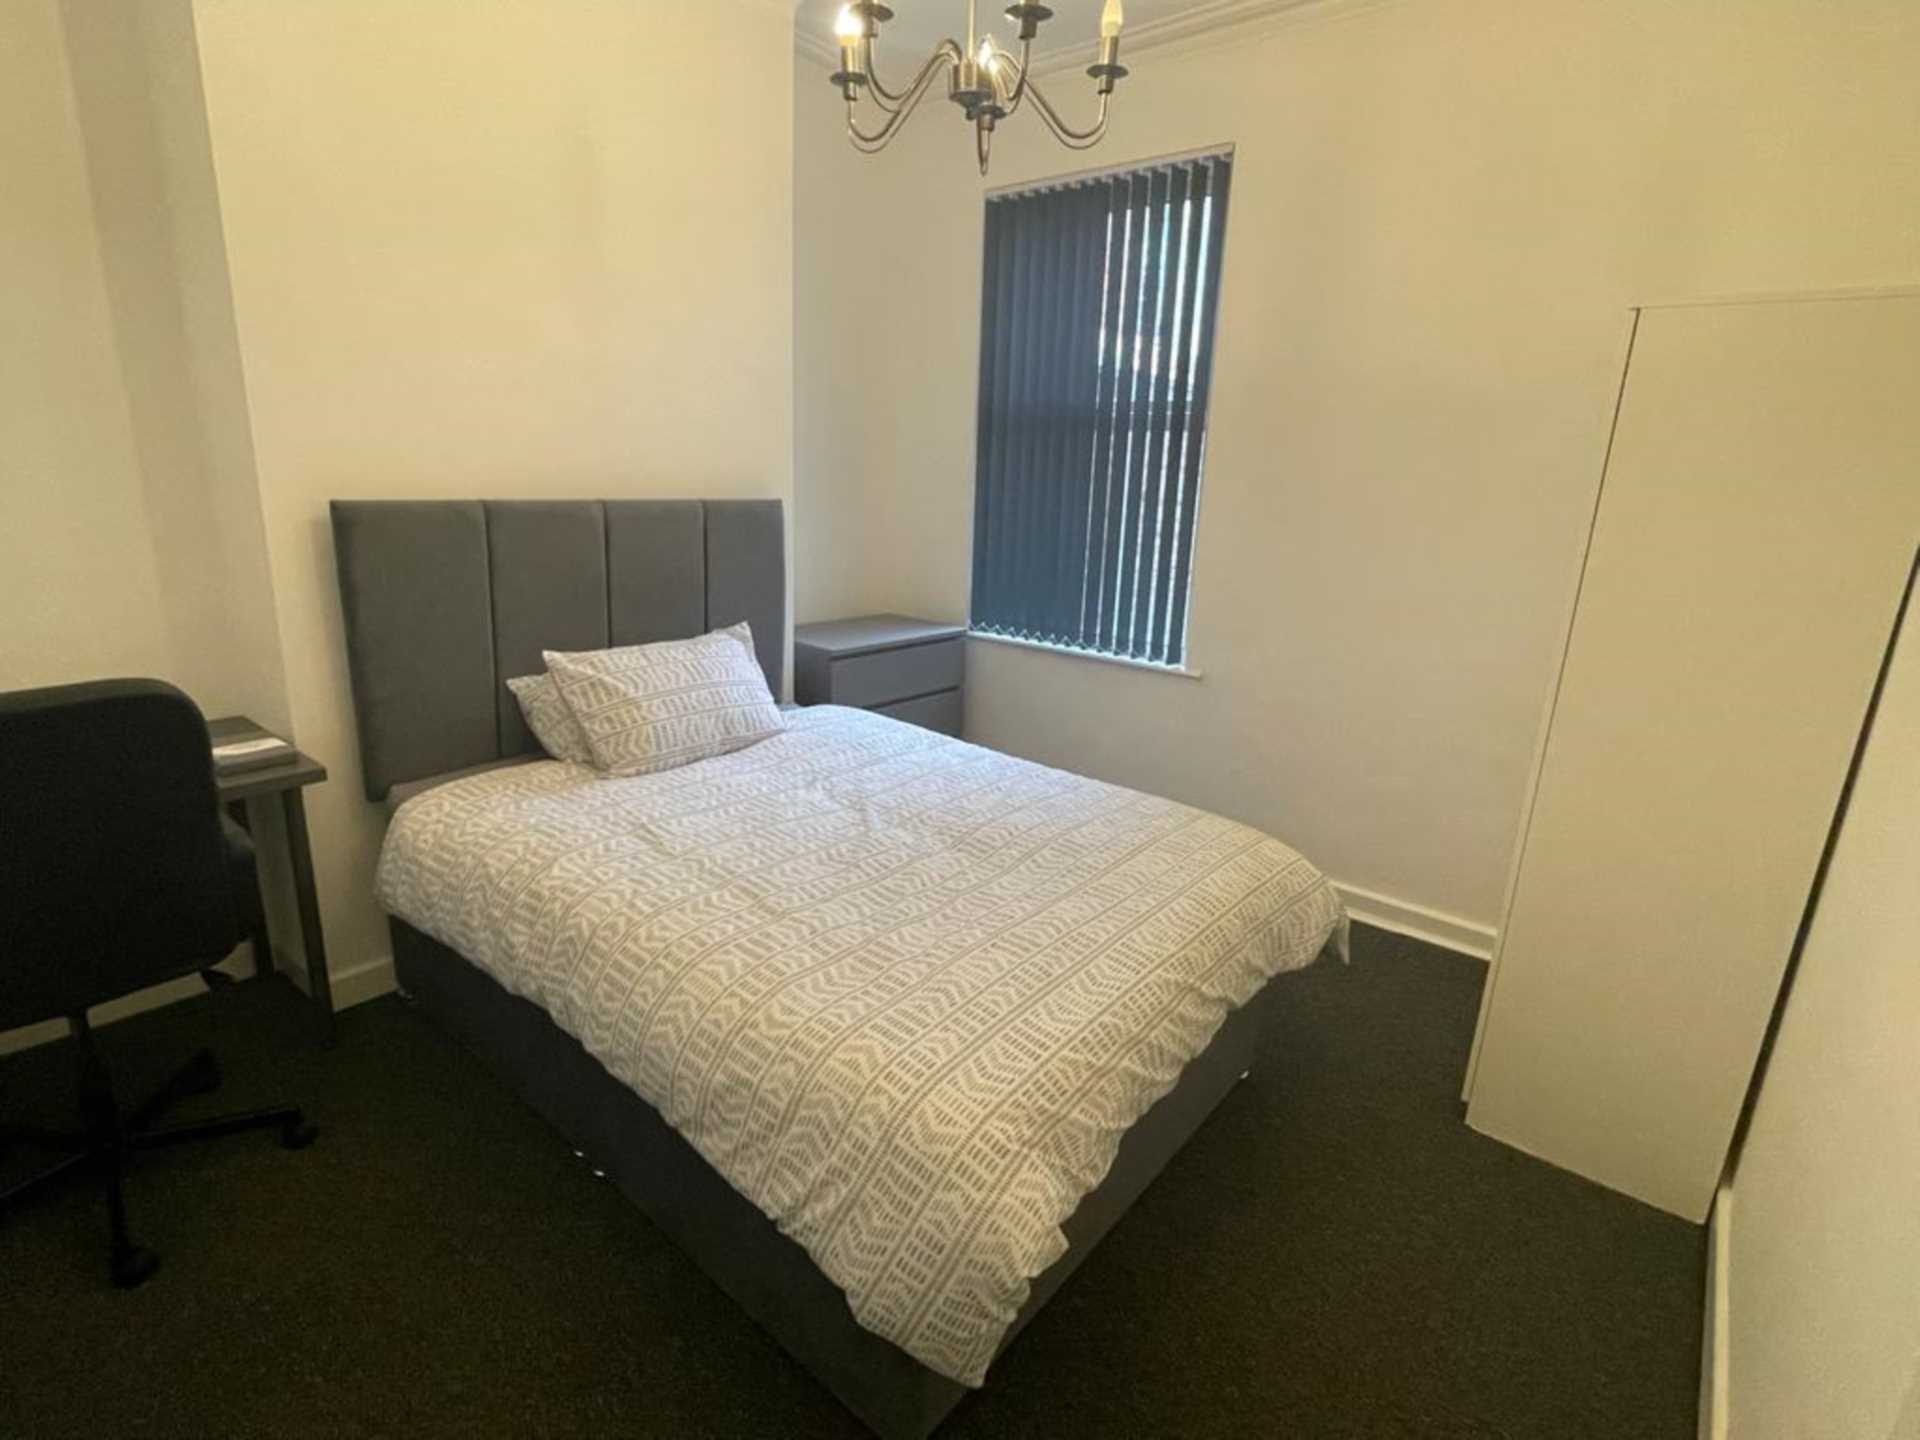 Thornycroft Road, Wavertree - 1 ROOM AVAILABLE - STUDENT ROOM, Image 8